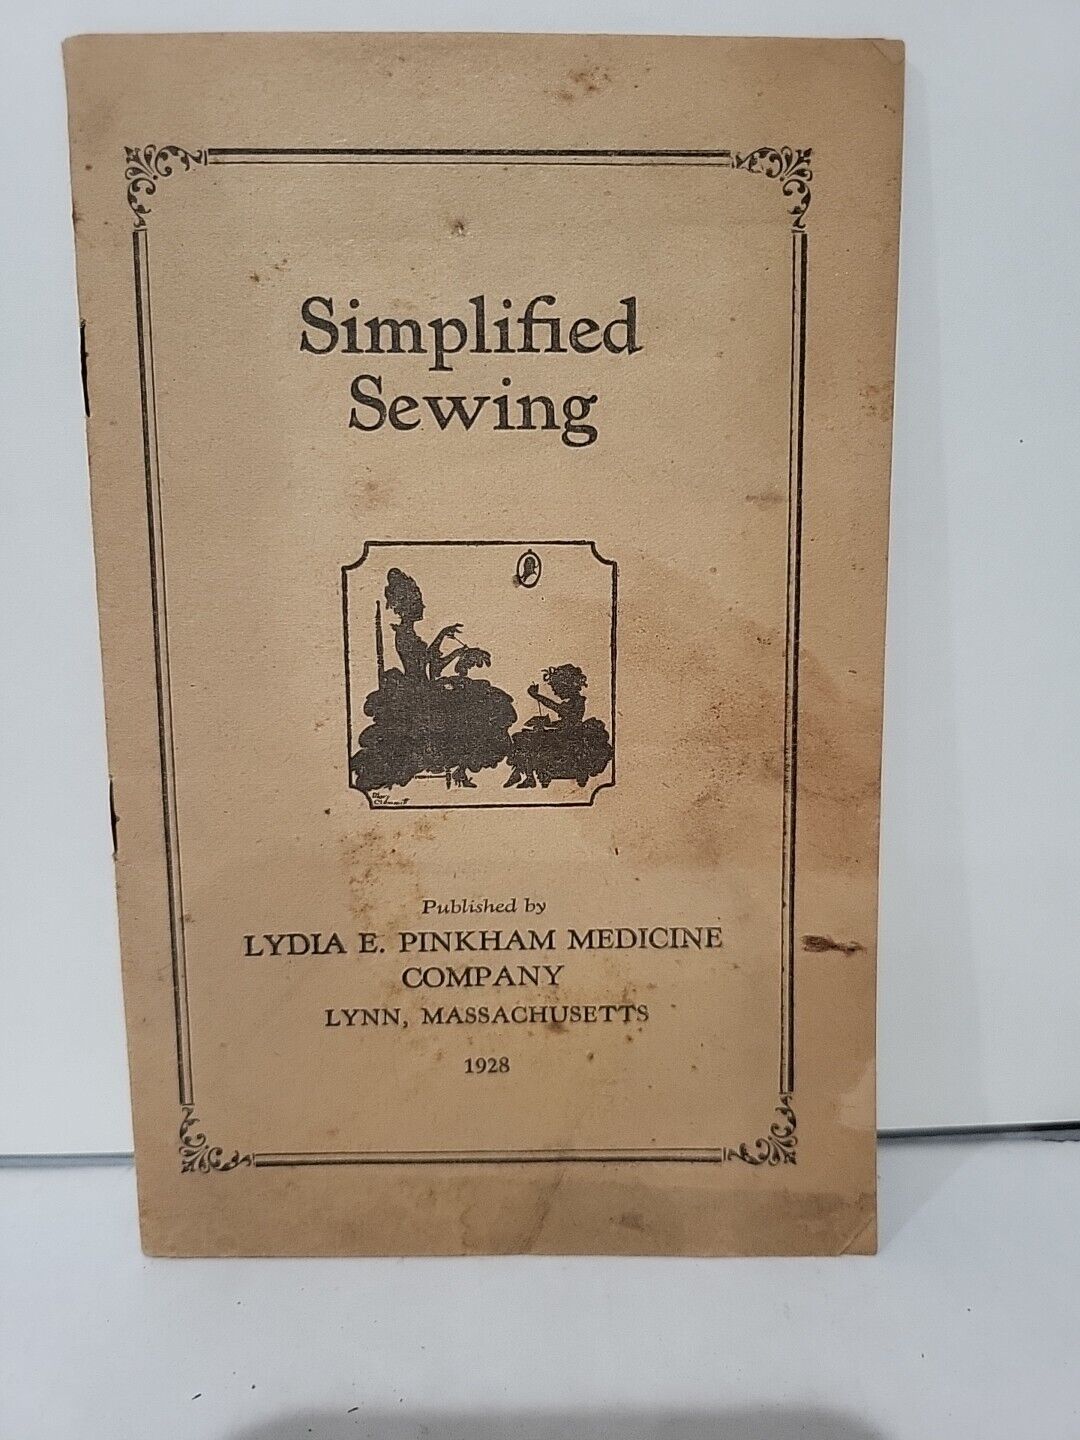 1928 LYDIA PINKHAM SIMPLIFIED SEWING Booklet w PATTERNS Advertising Illustrated